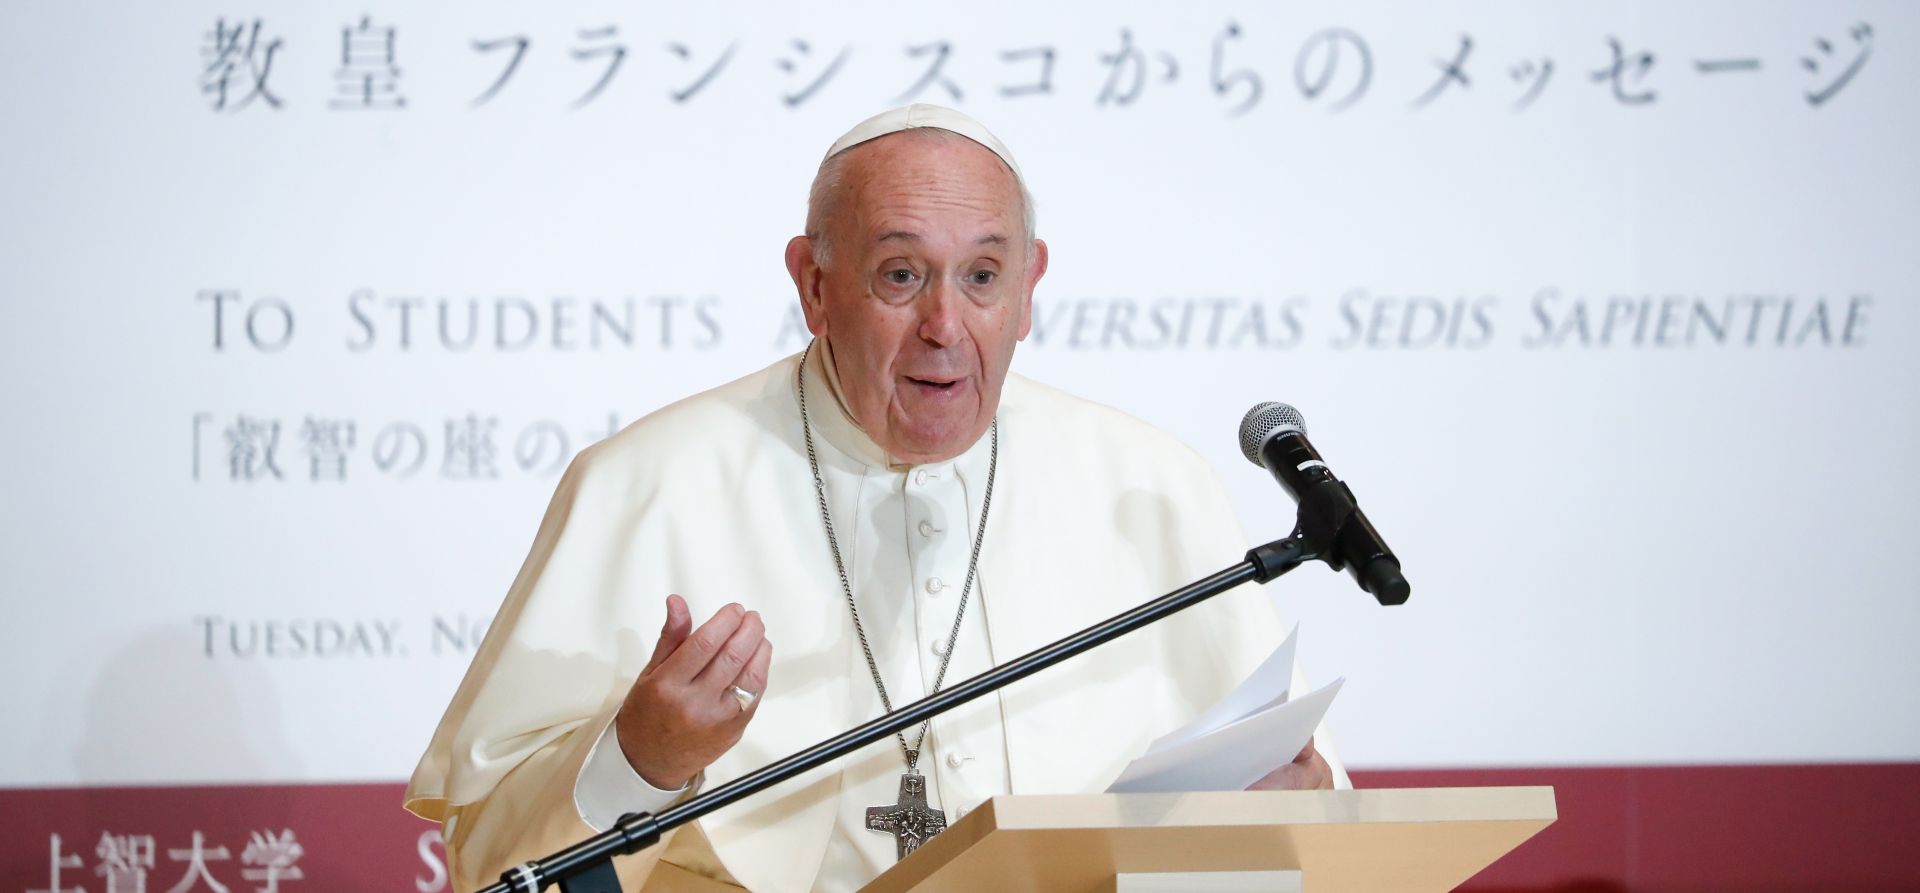 epa08025554 Pope Francis gives a speech at Sophia University in Tokyo, Japan, 26 November 2019. The pope is on a four-day visit to Japan, the first in 38 years and only the second in history.  EPA/KIM HONG-JI / POOL